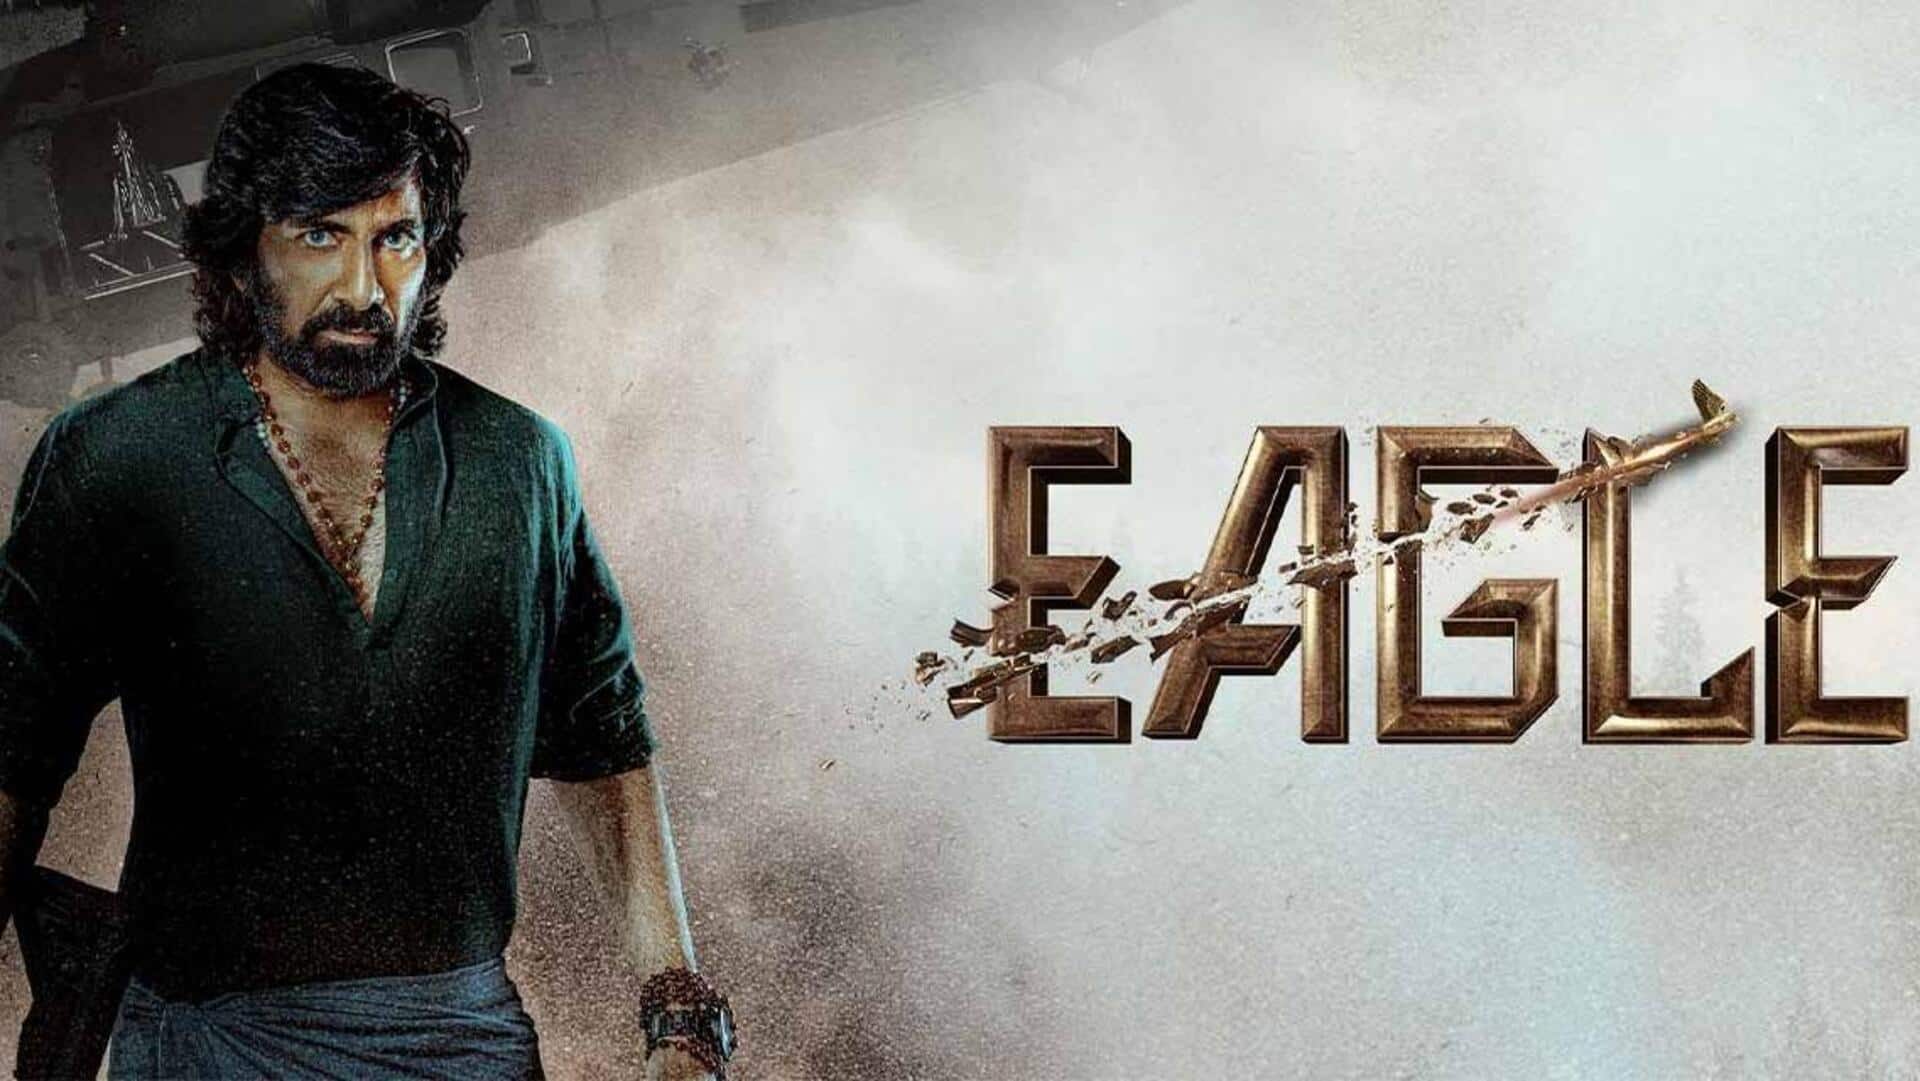 Ravi Teja's 'Eagle' eyeing for Republic Day weekend release: Report